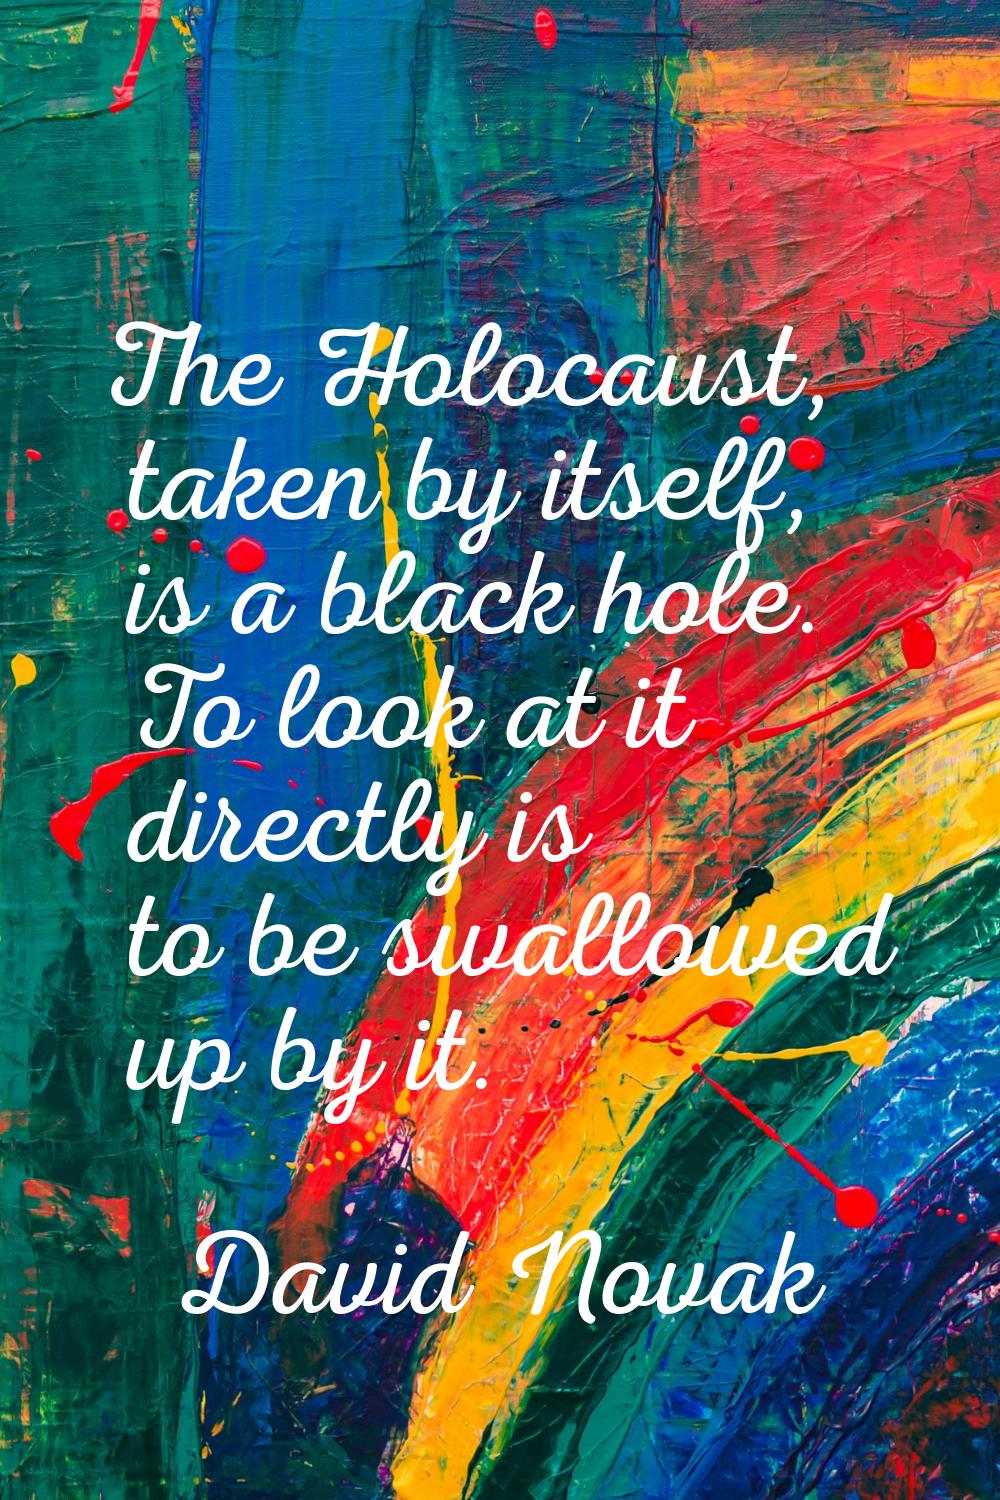 The Holocaust, taken by itself, is a black hole. To look at it directly is to be swallowed up by it